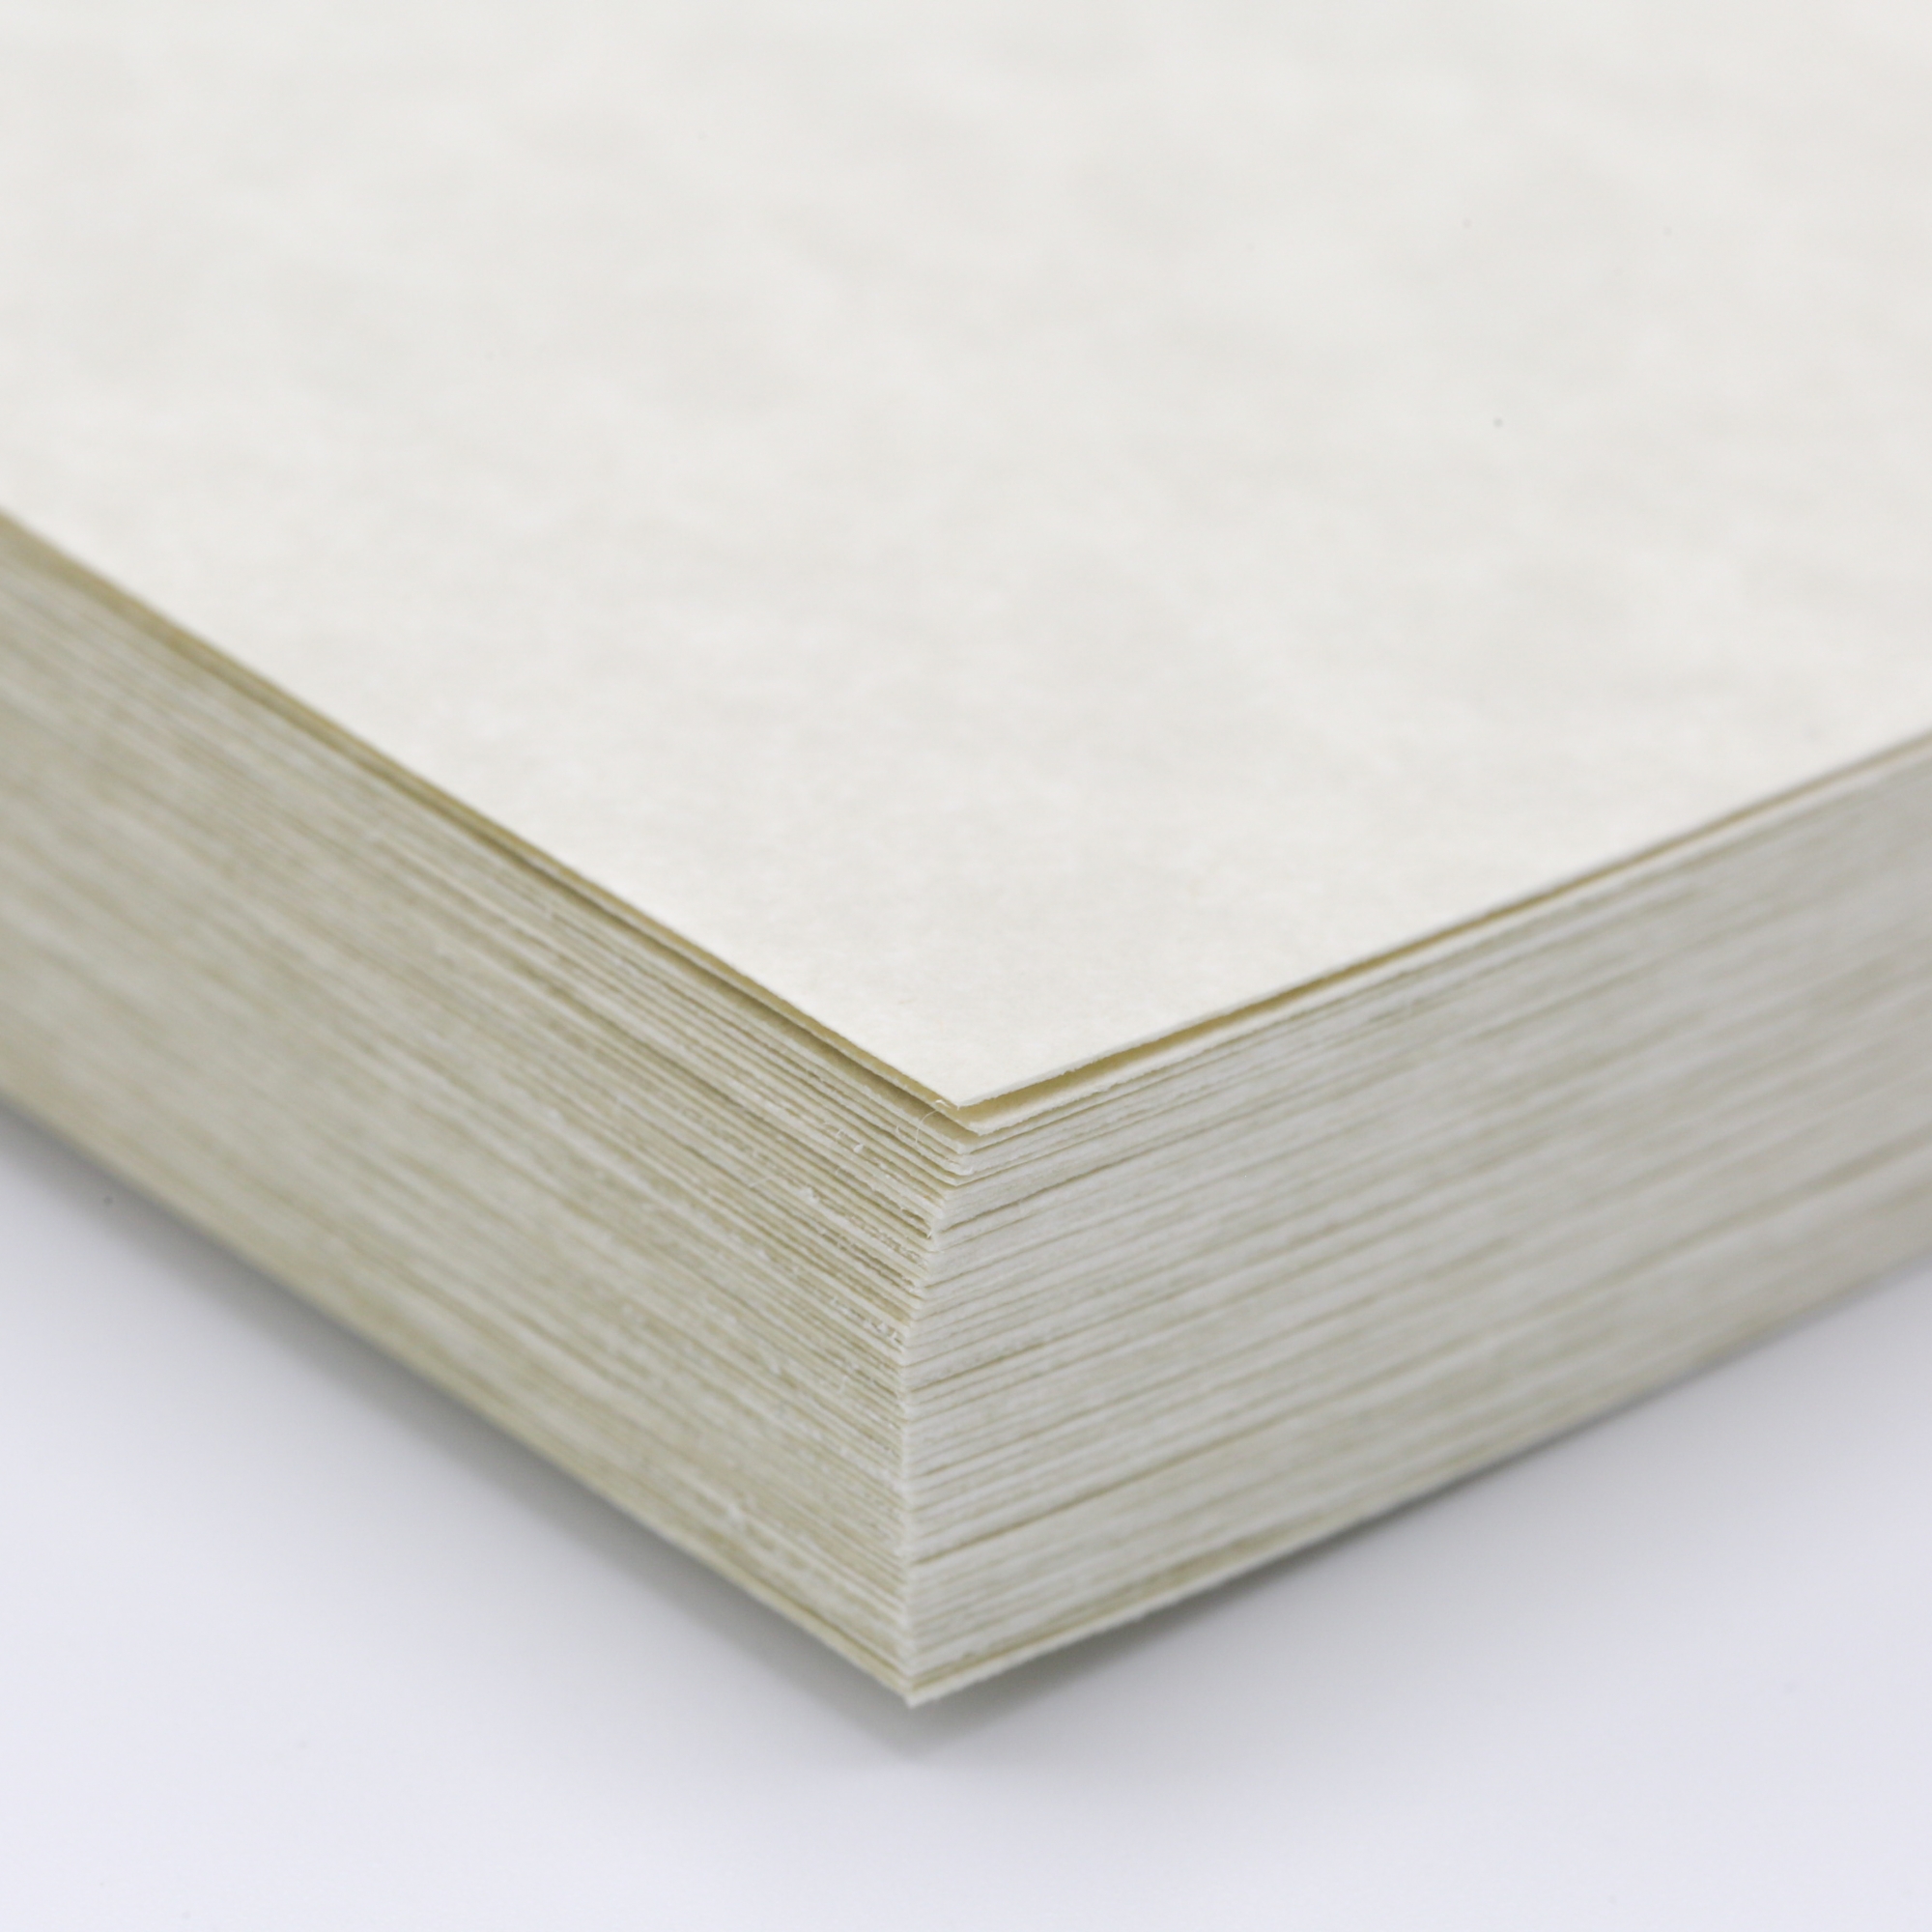 Royal Linen Ivory 24lb/90g Writing 8-1/2x11 500/pkg, Paper, Envelopes,  Cardstock & Wide format, Quick shipping nationwide